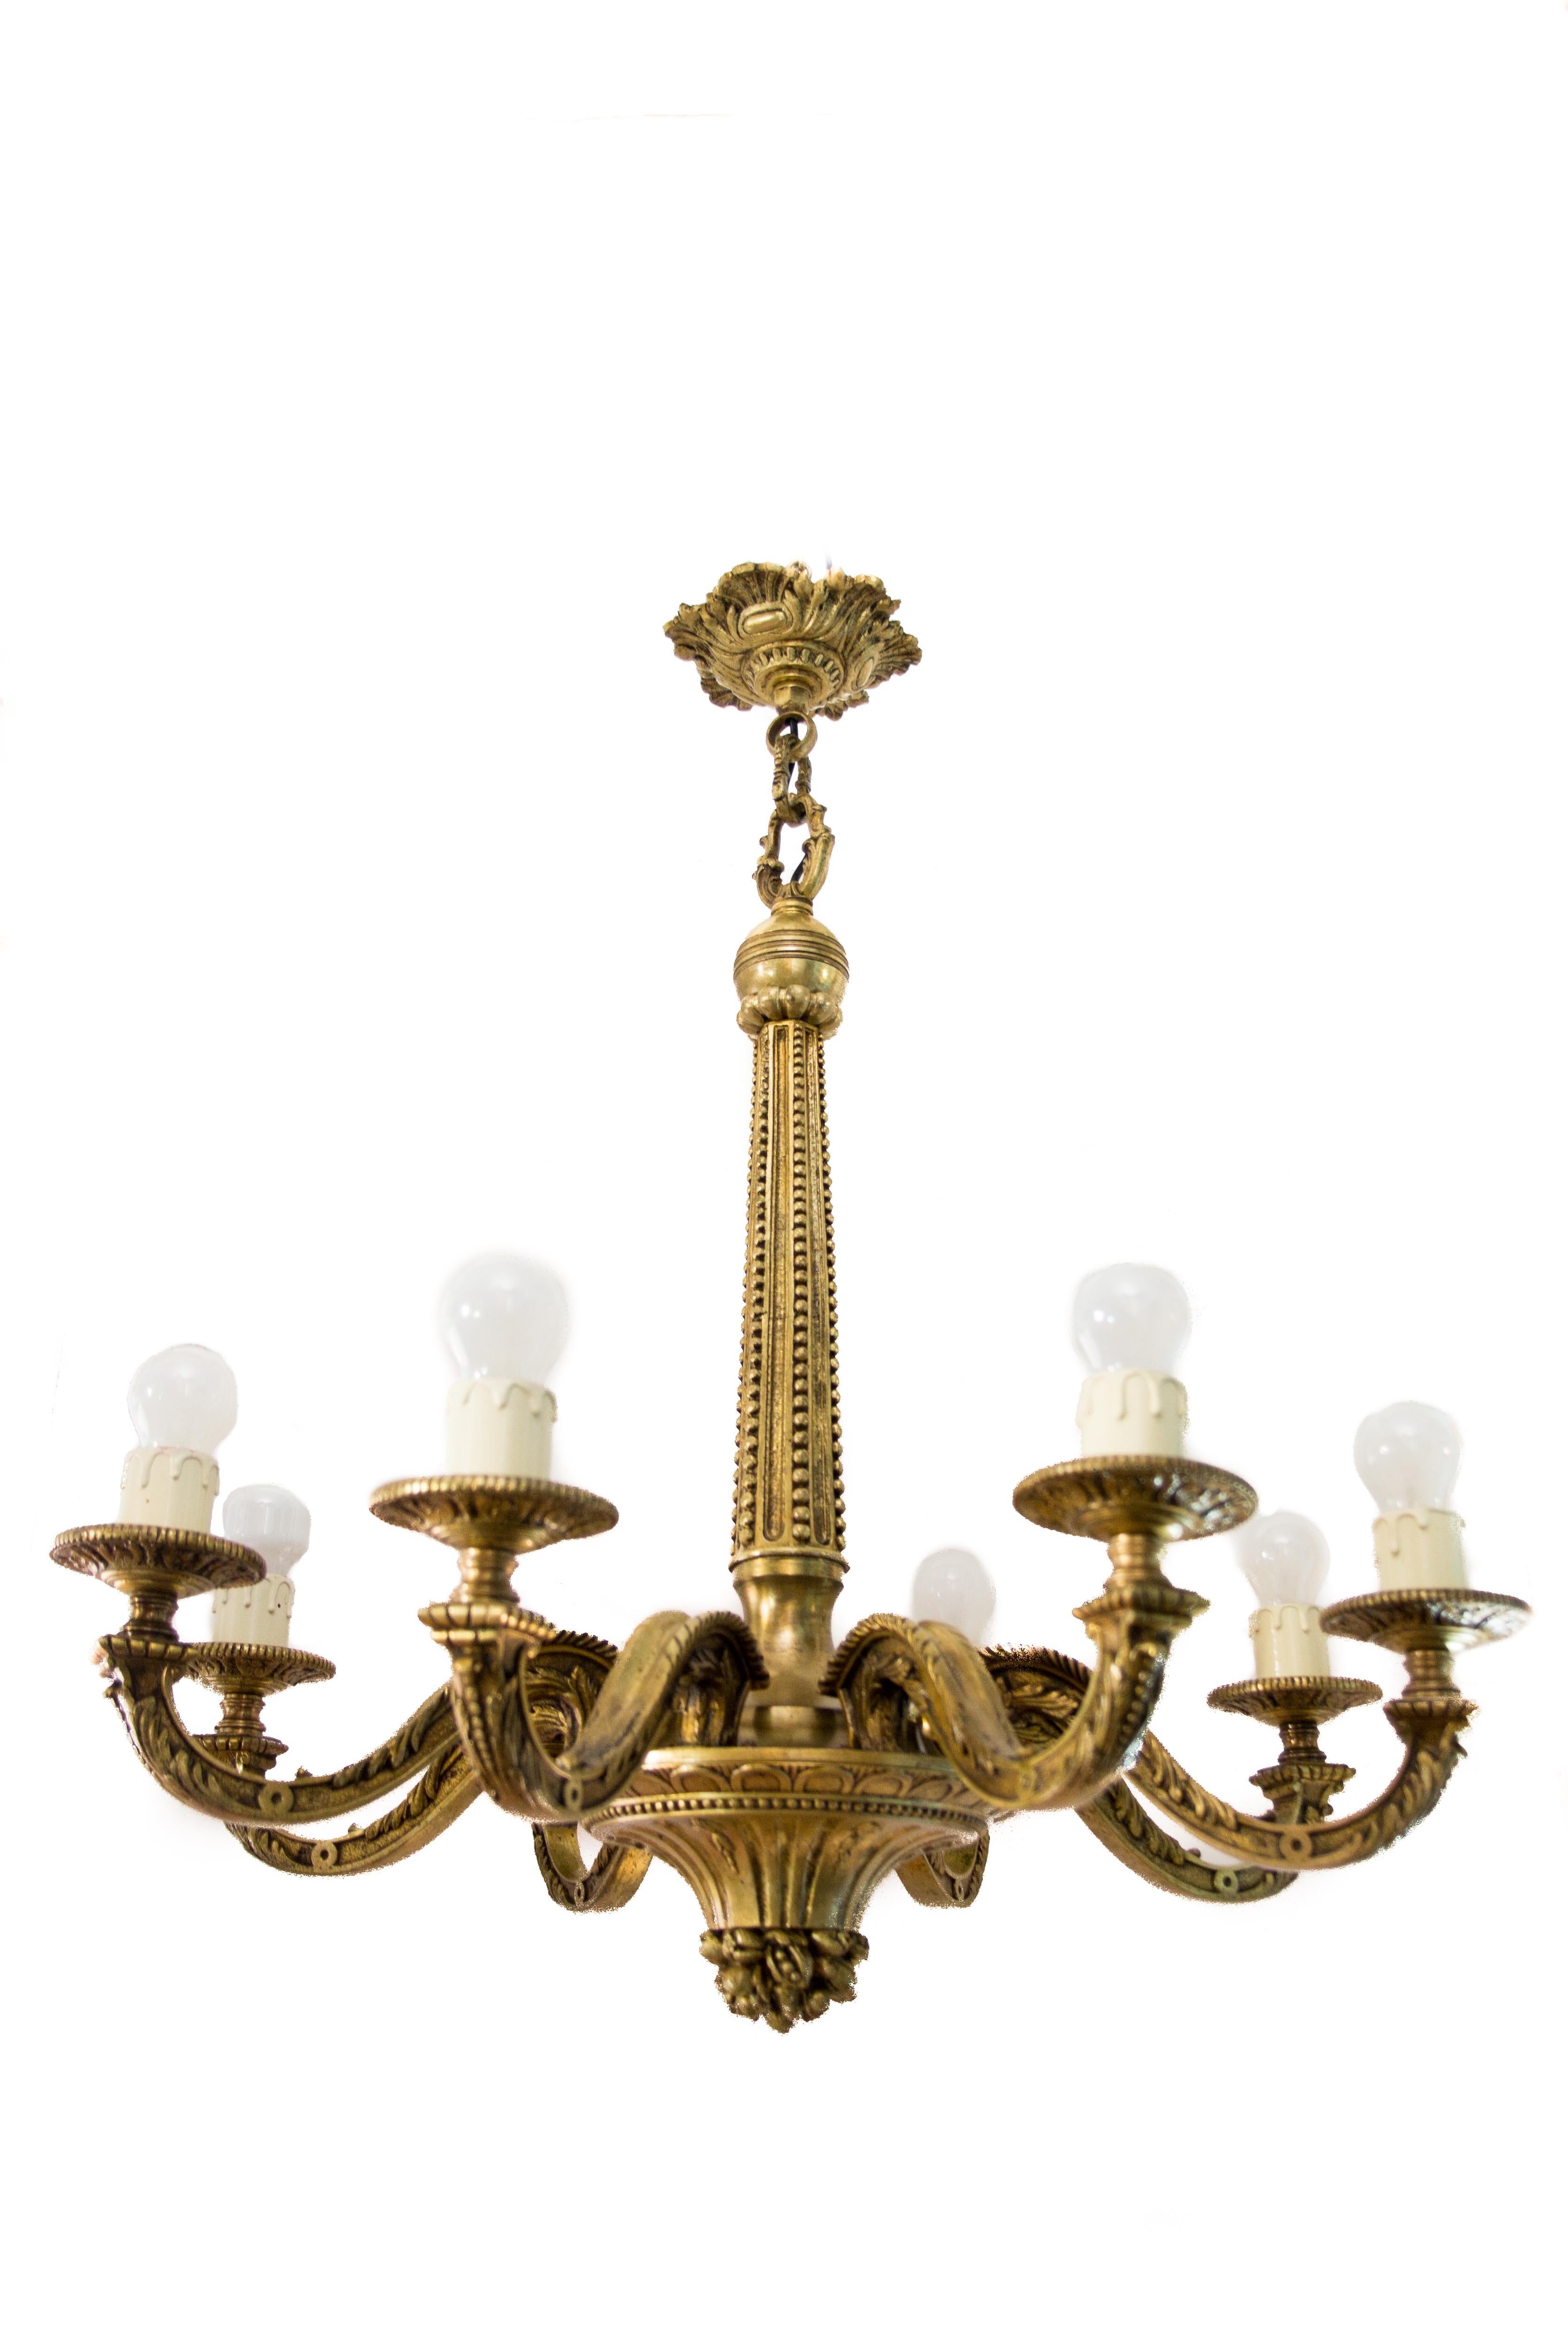 Impressive, massive, and heavy French bronze chandelier from the 1900s. This chandelier has eight arms, each with an E27 (E26) light bulb socket,  decorated with foliate decors and ending in circular drip pans. The ornate base has a berry cluster